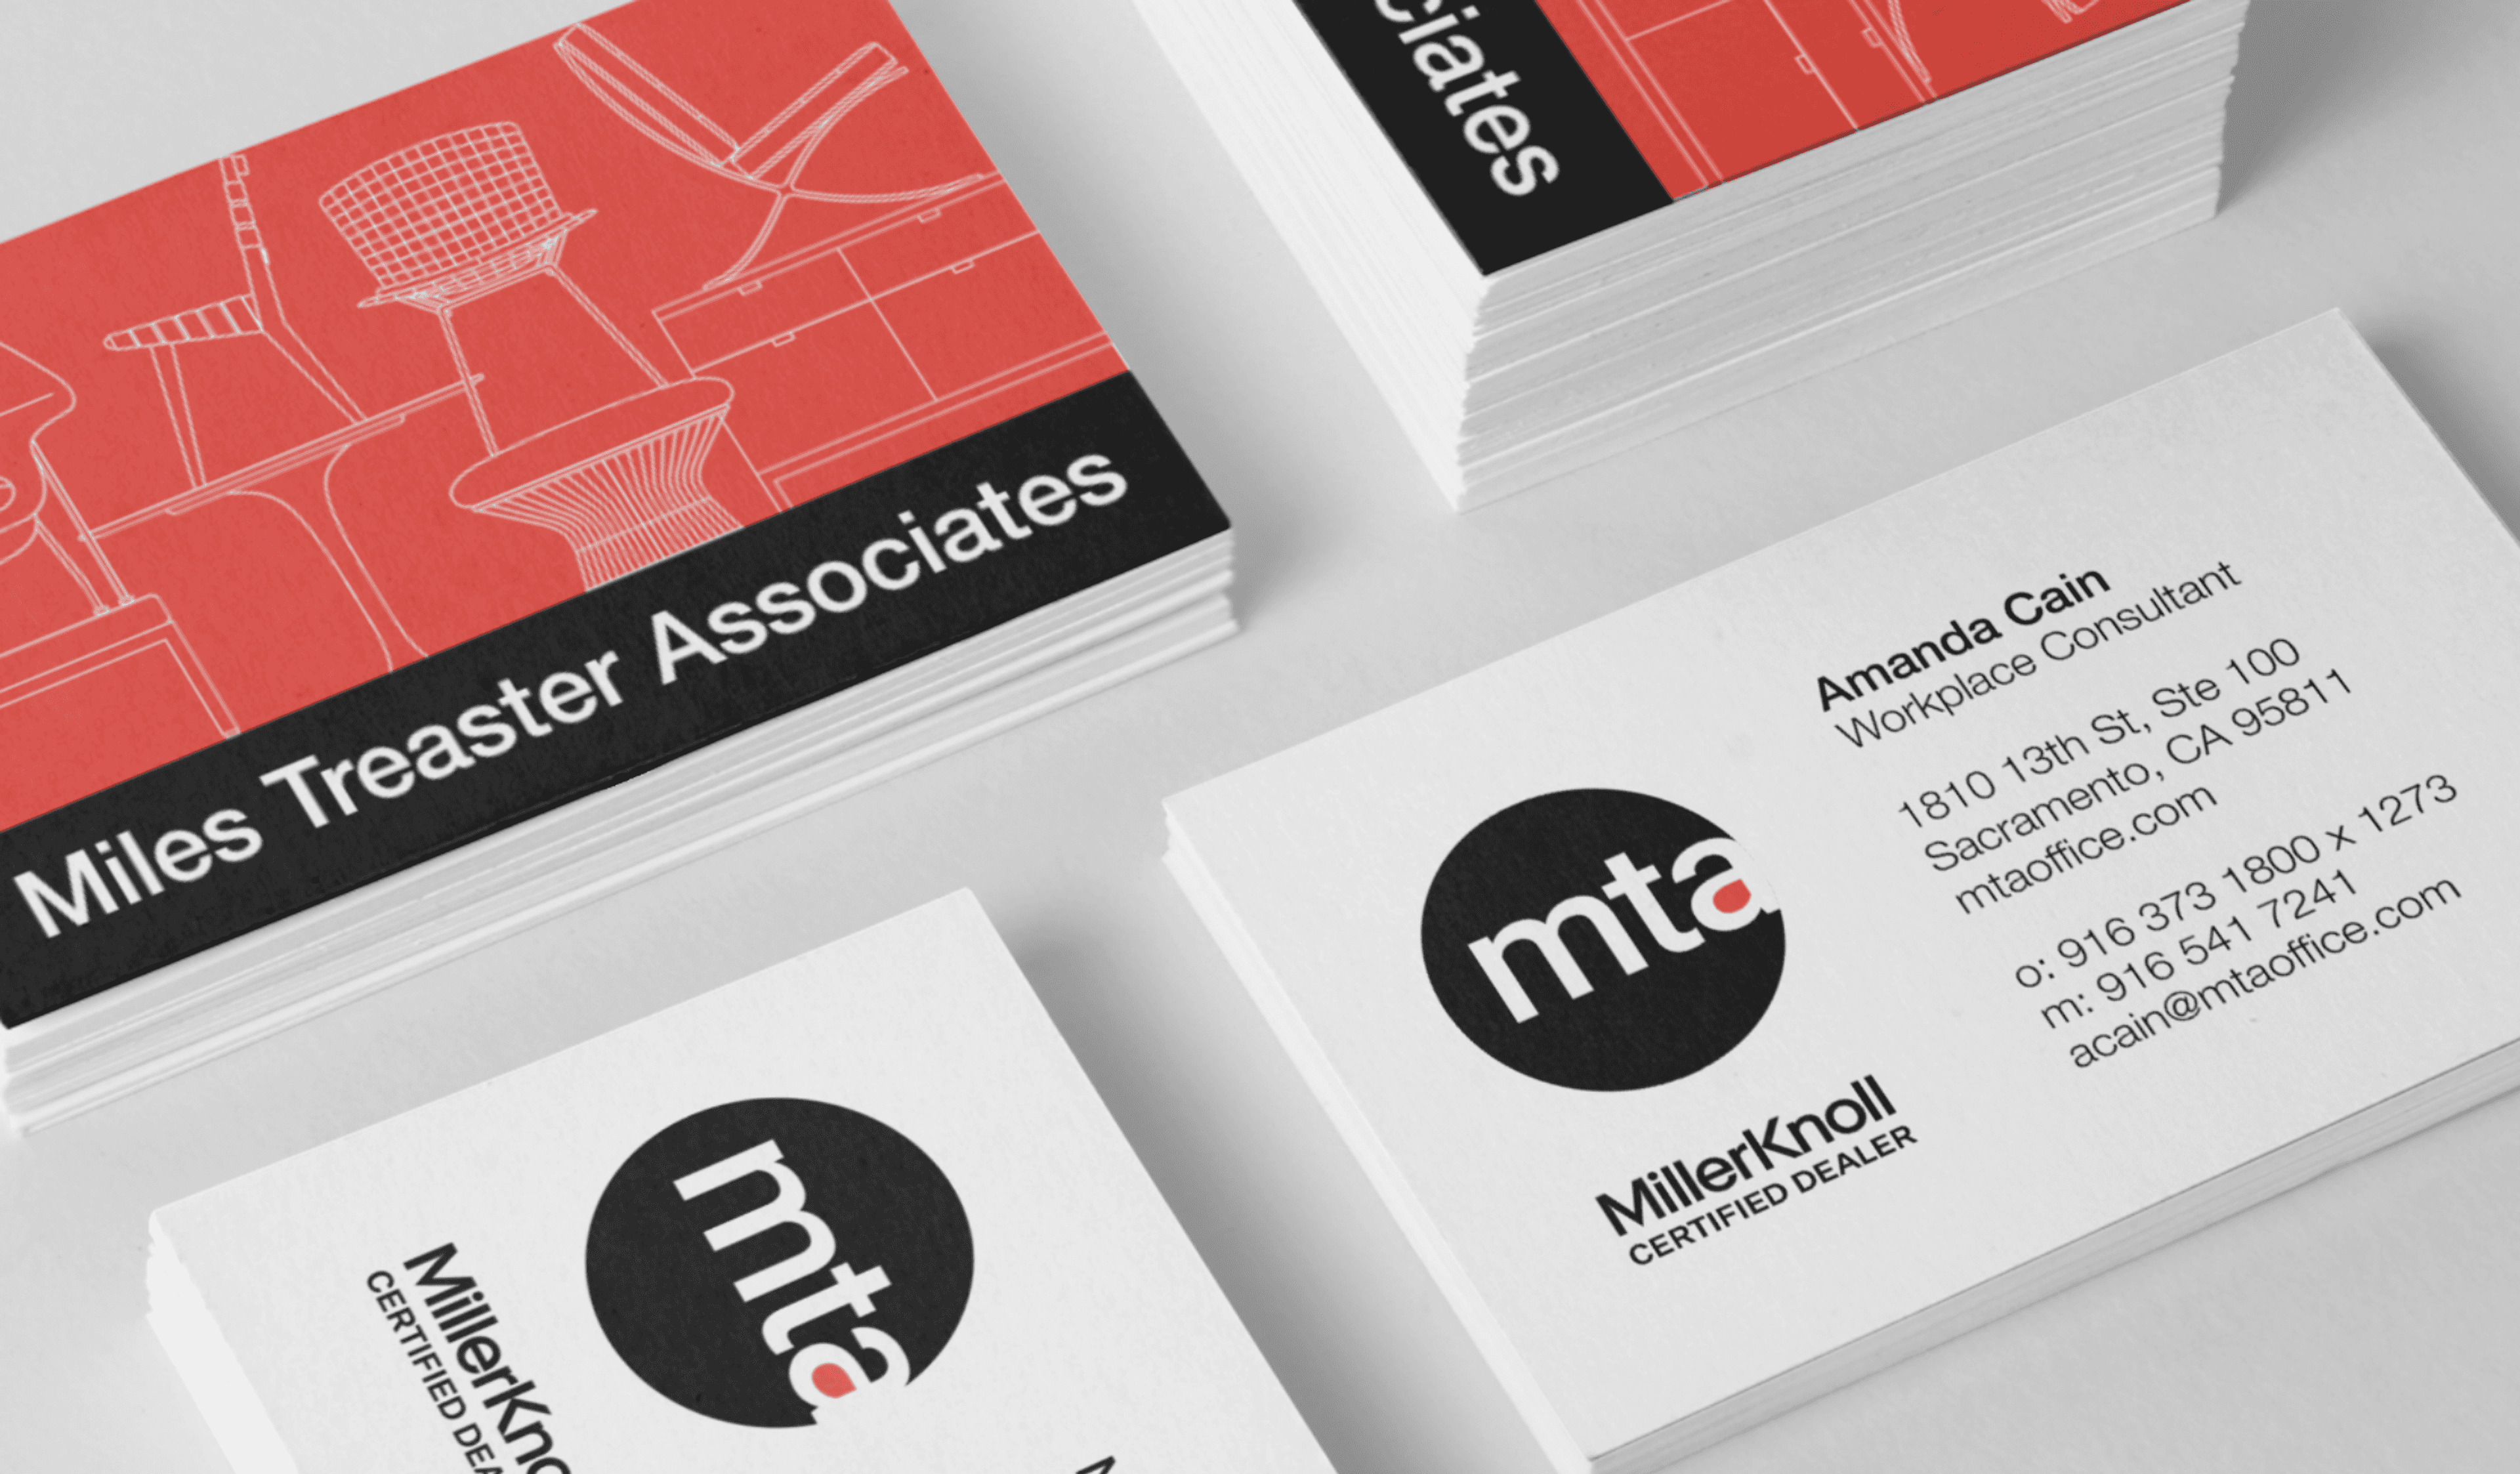 Branding campaign for a MillerKnoll dealership featuring a new logo and business cards by Brenna Hamilton.